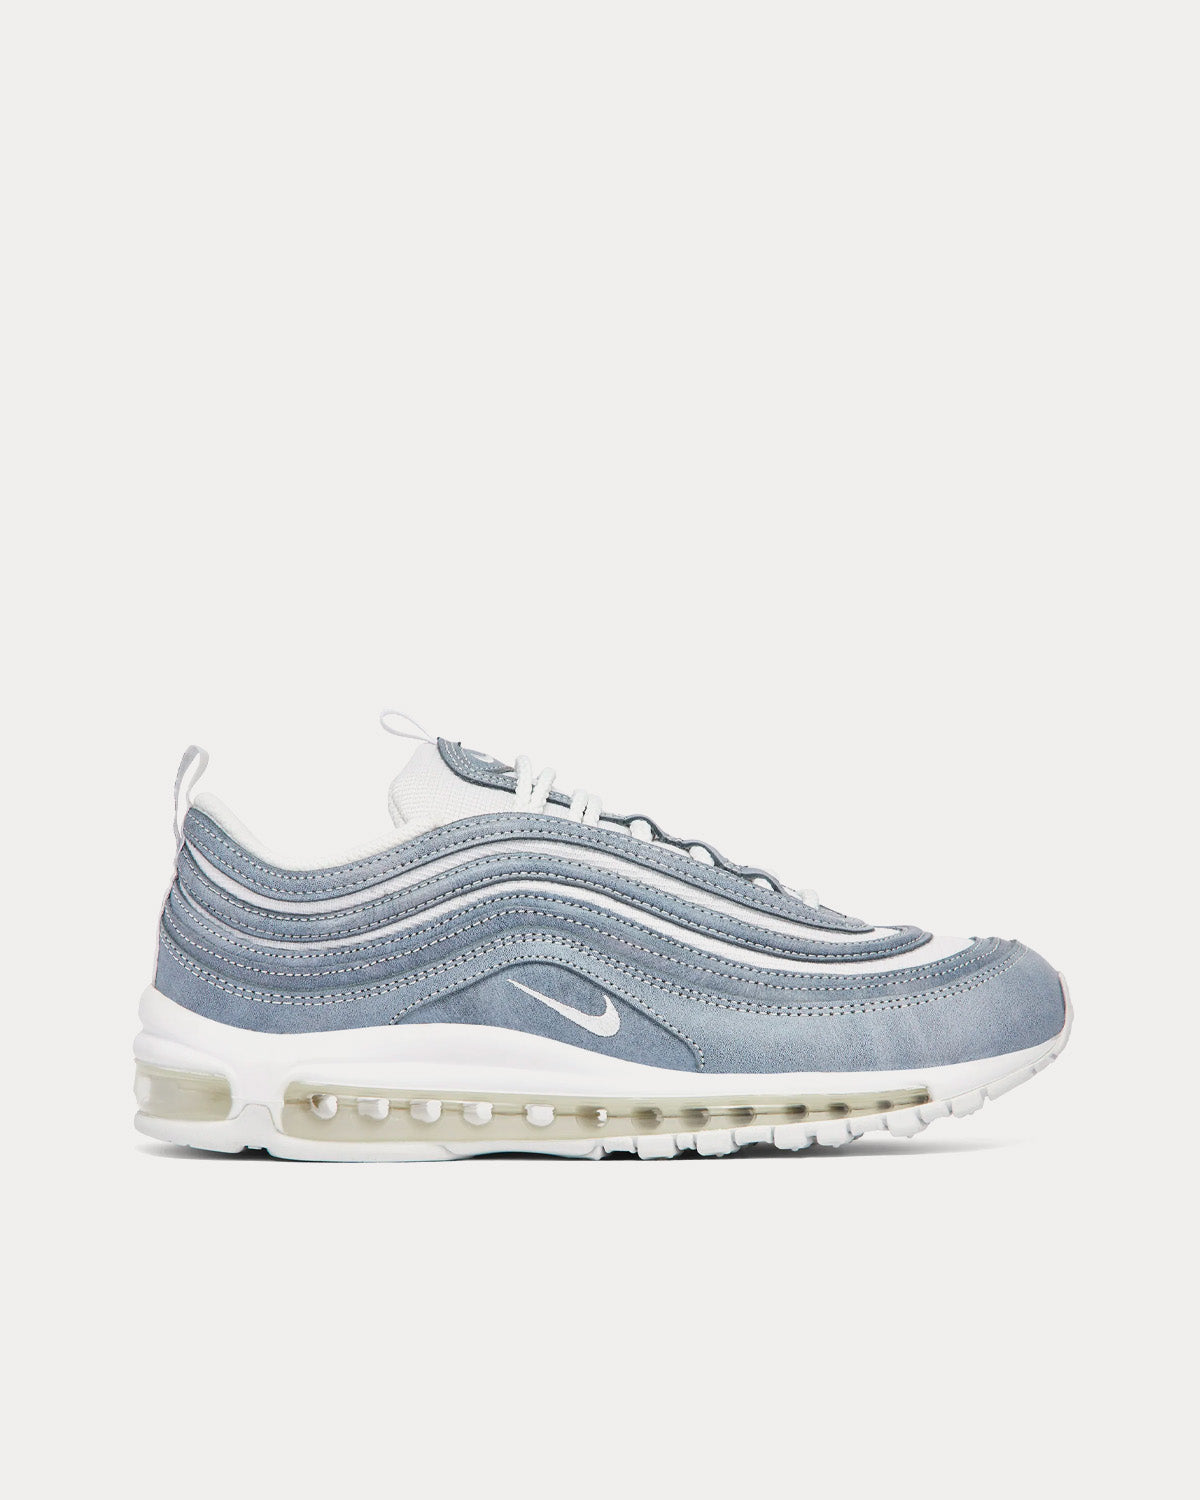 Nike x Comme des Garçons - Air Max 97 Glaicer Grey Low Top Sneakers